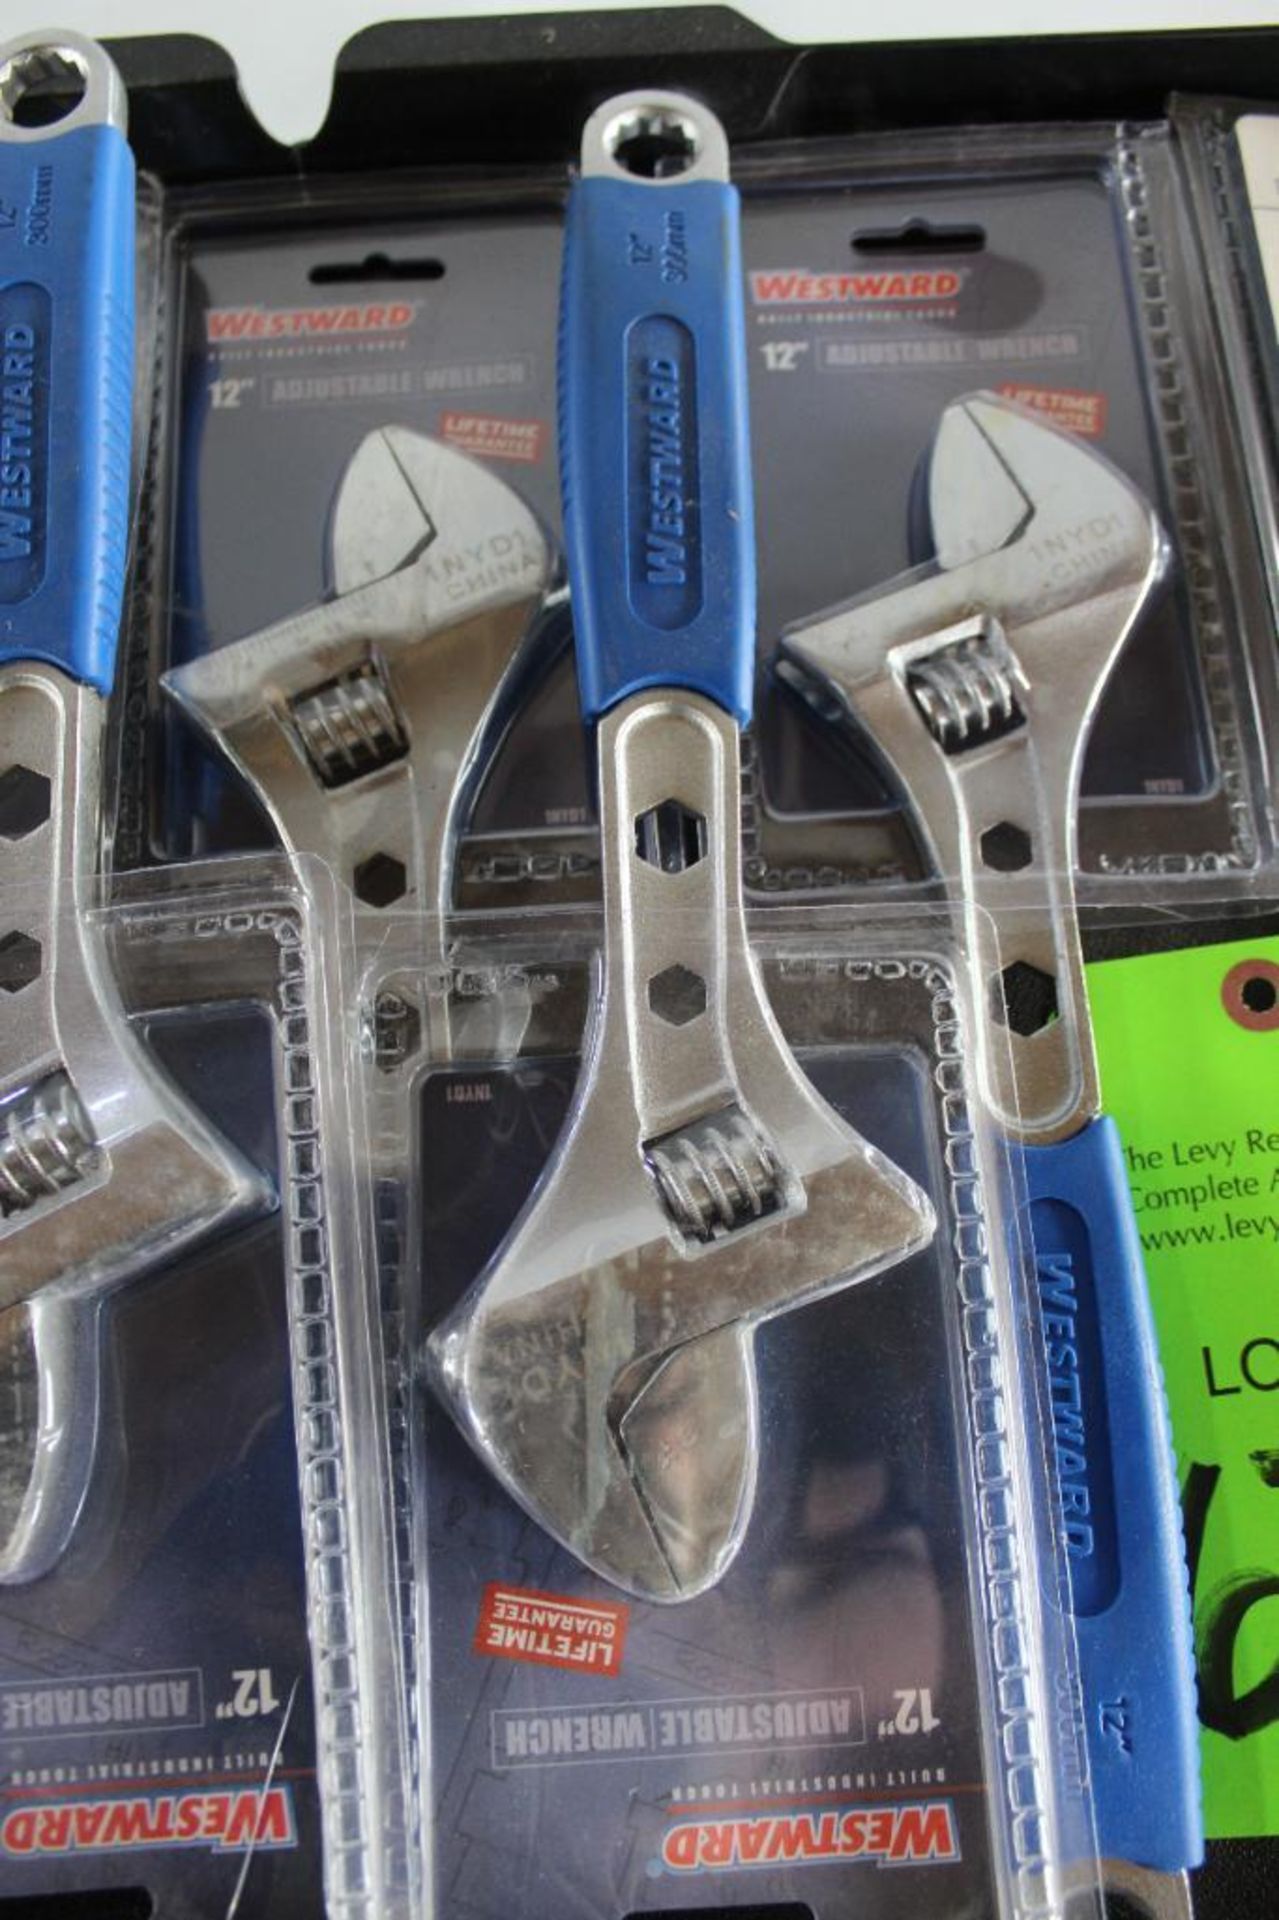 Lot of (8) Westward 12" Adjustable Wrench - Image 3 of 3